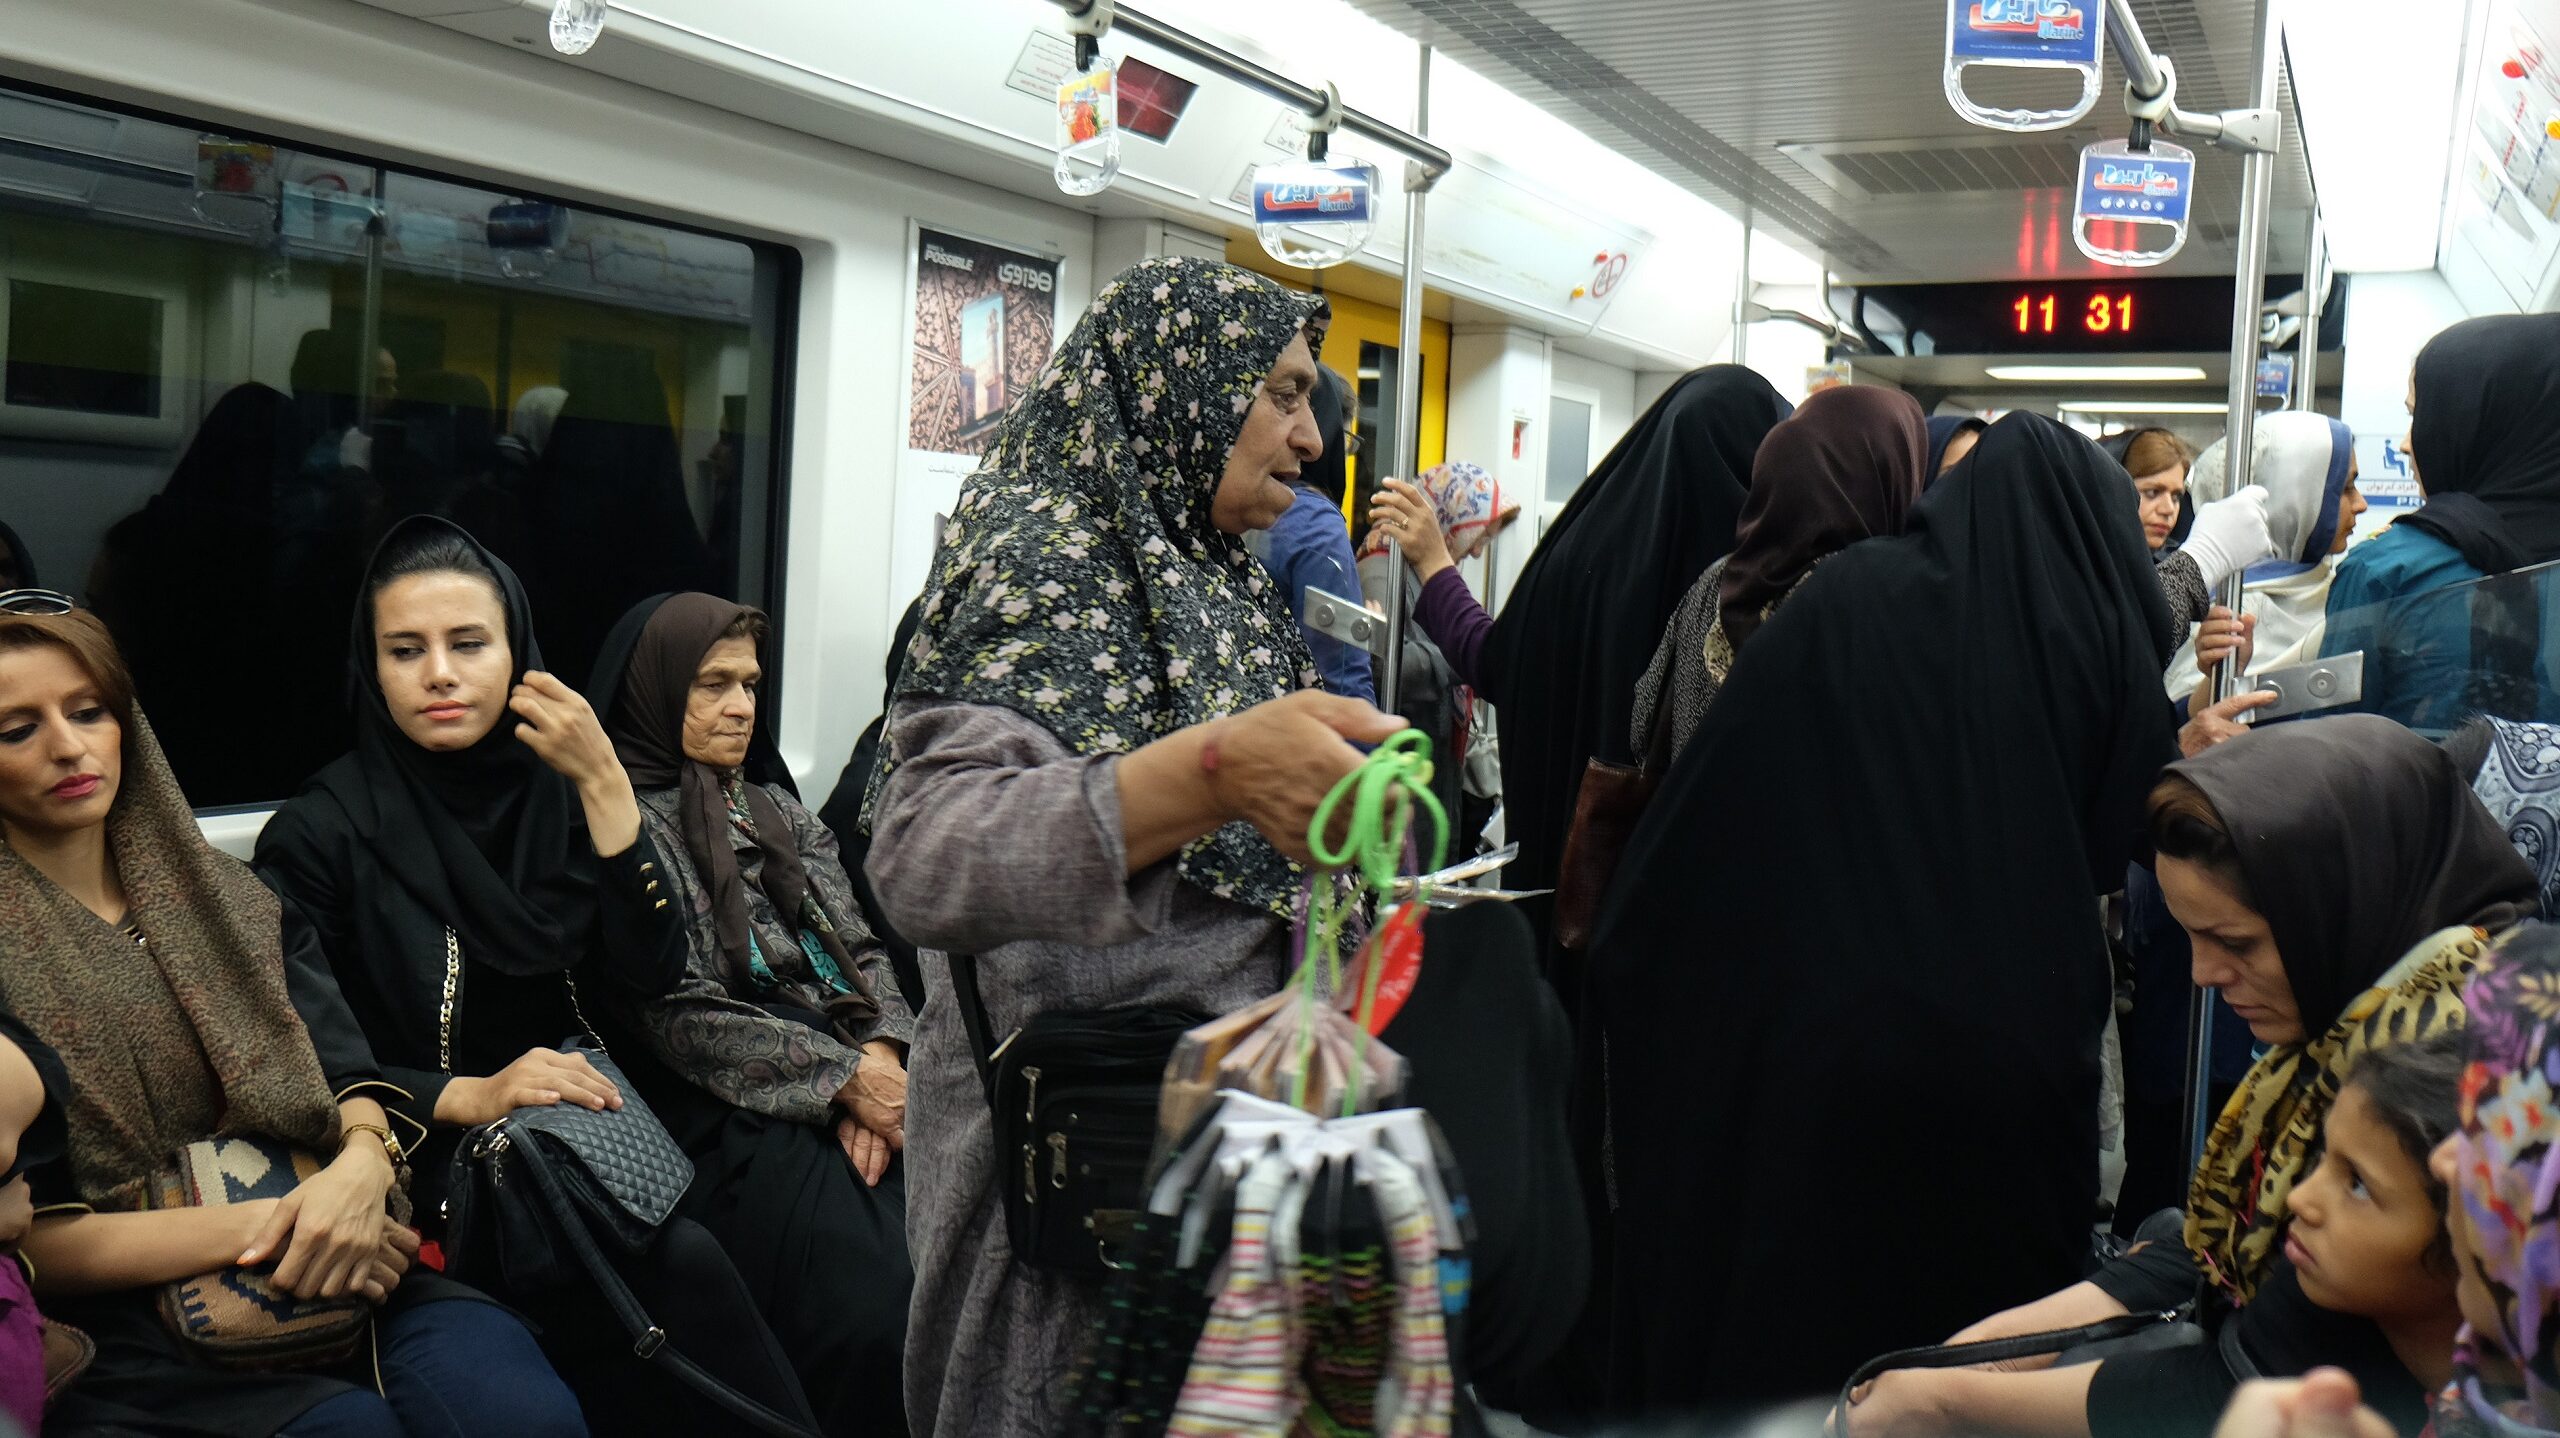 Iran Bars Women Without Hijab From Tehran Metro as Crackdown on Women’s Rights Continues